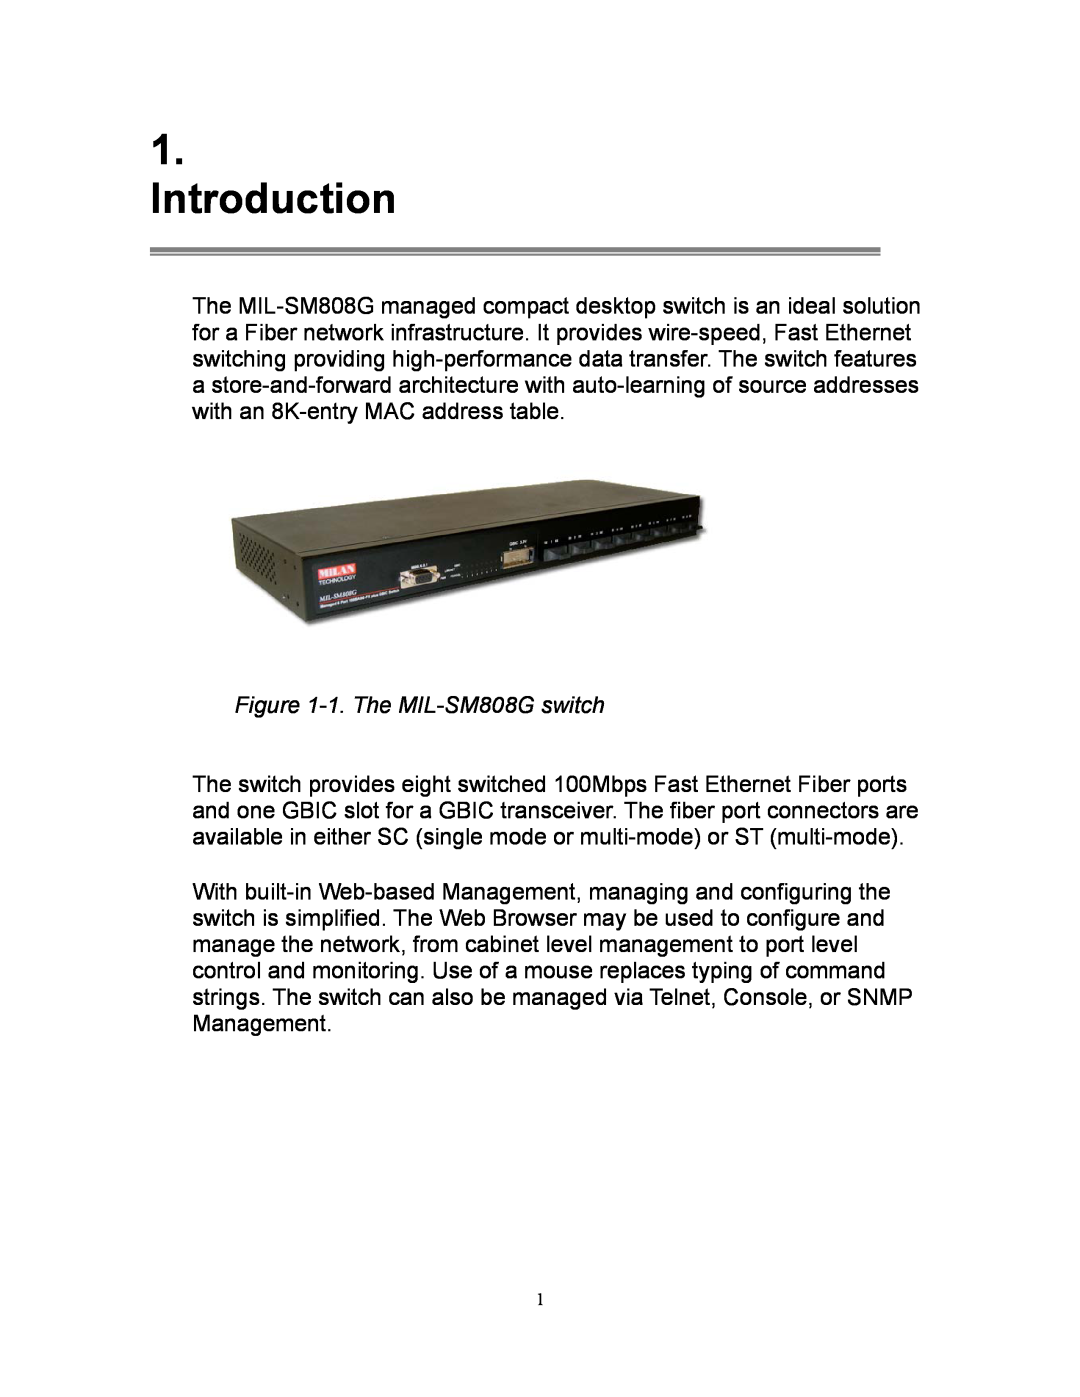 Milan Technology manual Introduction, 1. The MIL-SM808G switch 